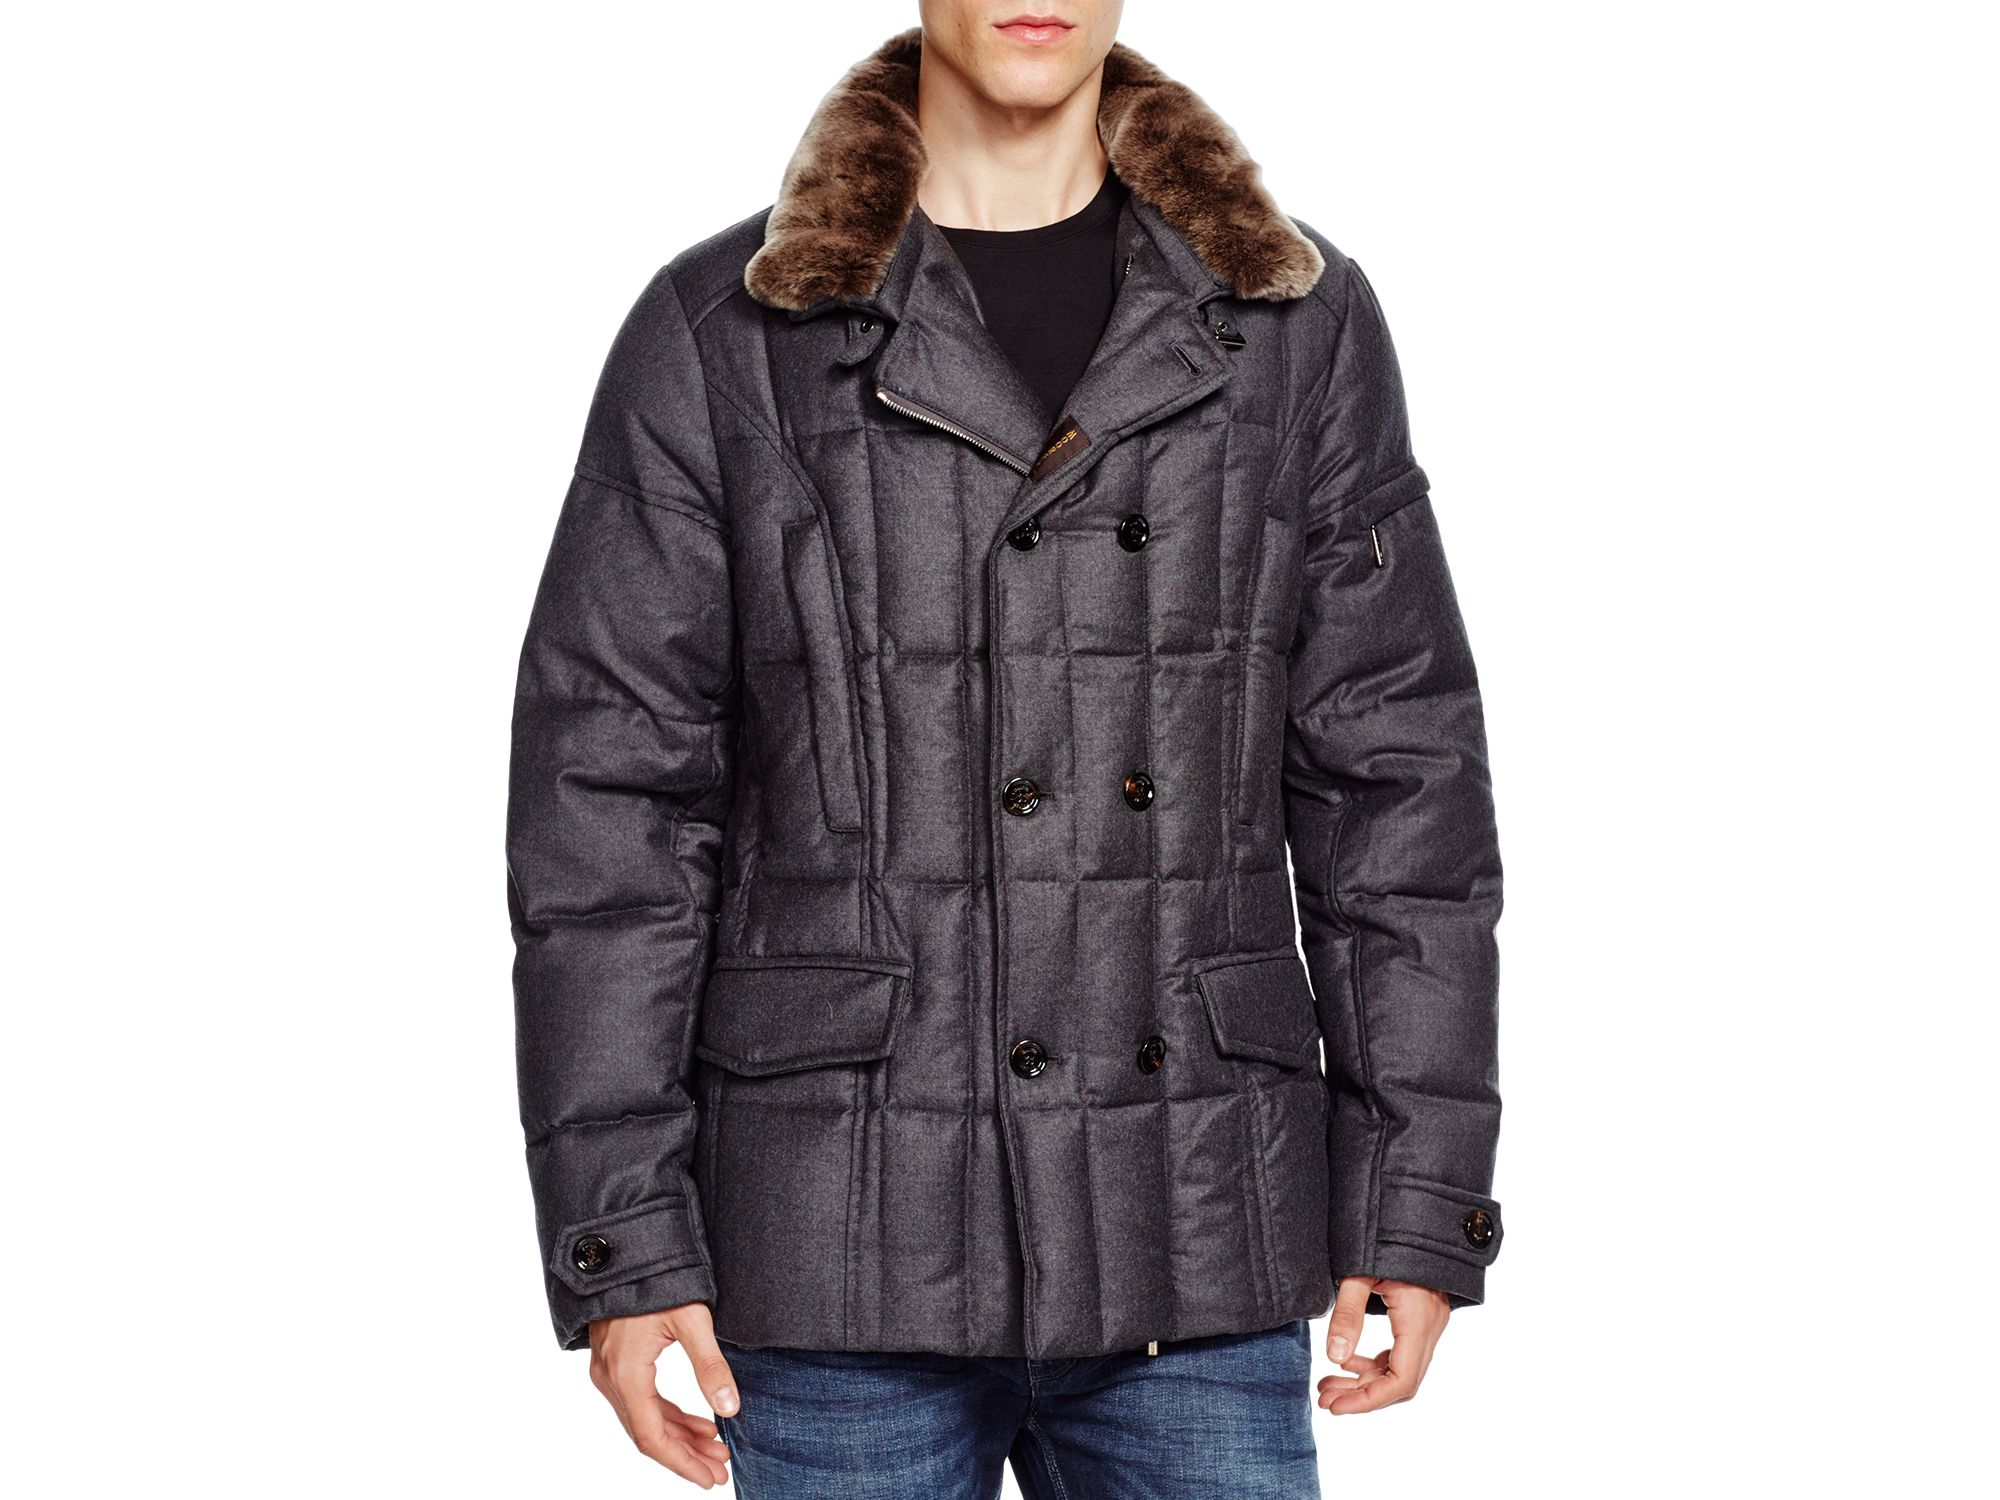 Lyst - Moorer Fur Trim Quilted Down Jacket in Gray